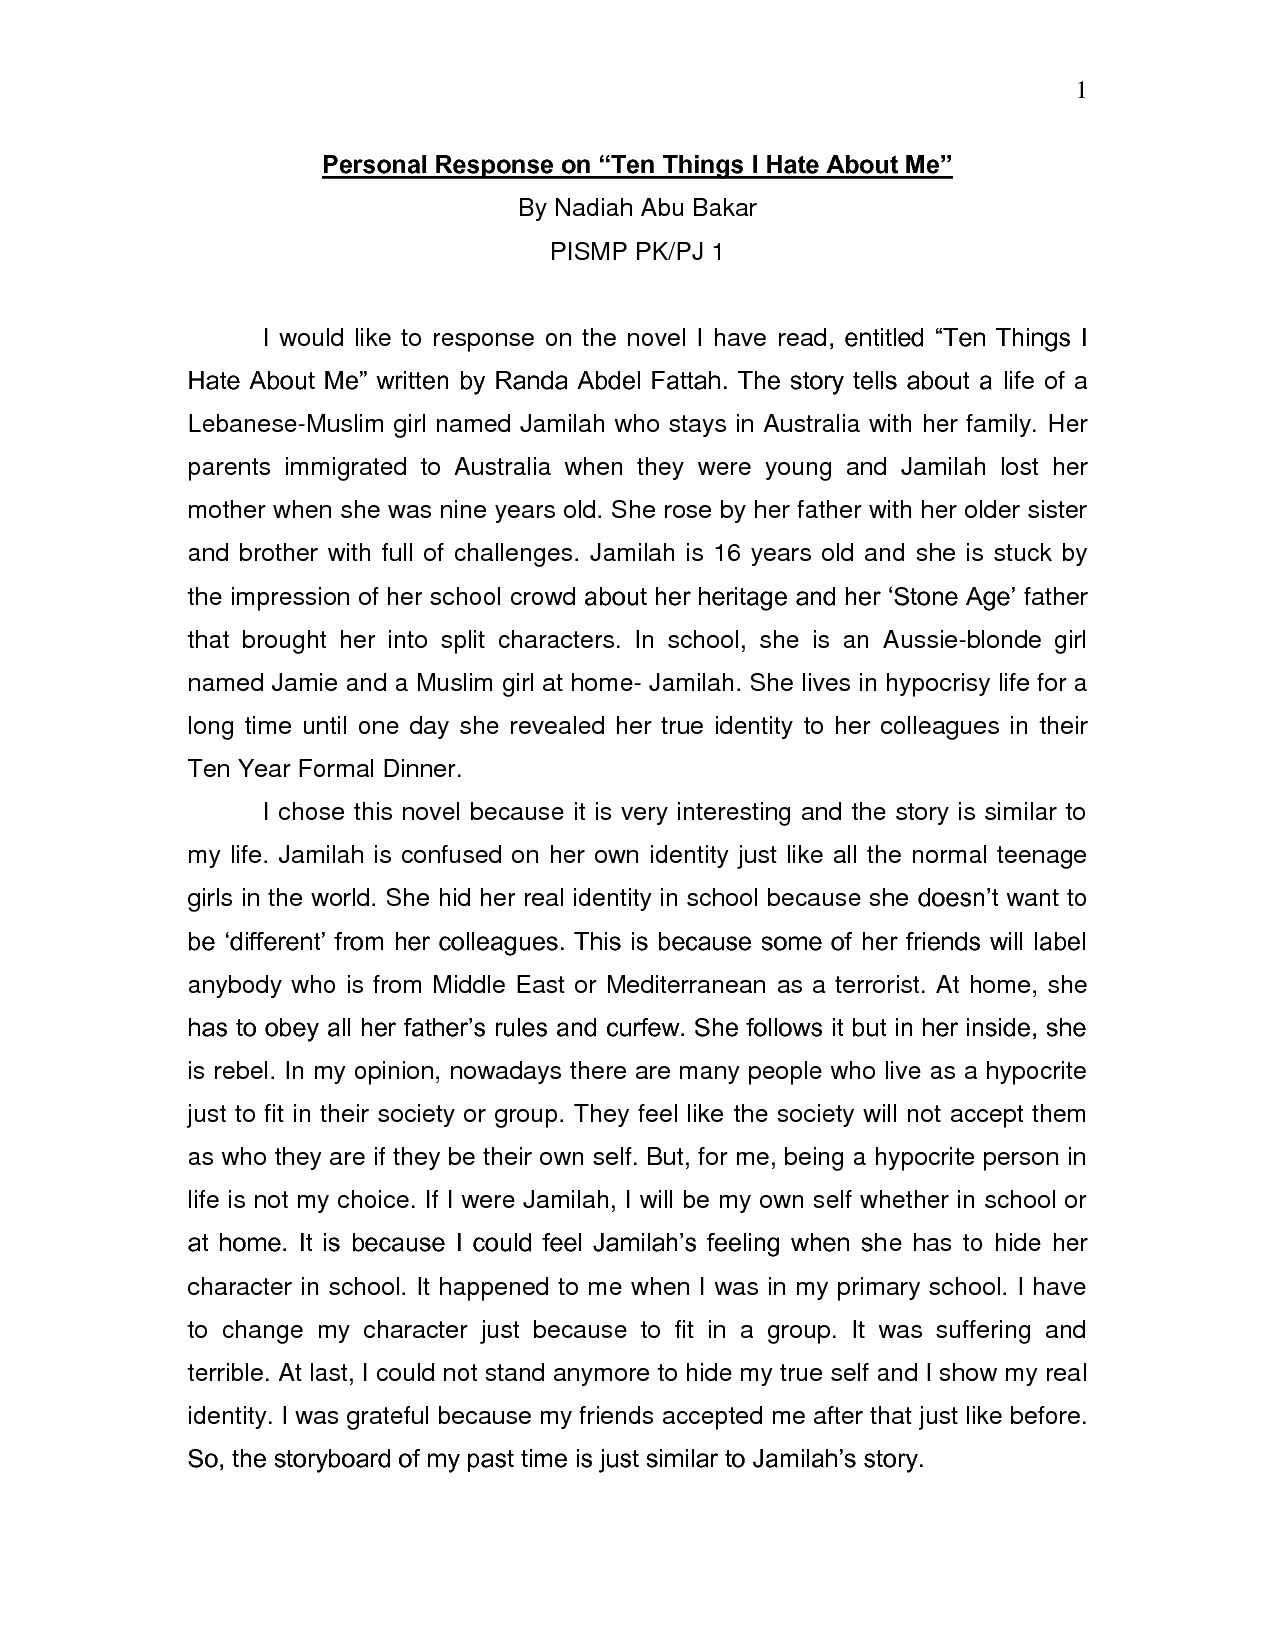 Book Reflection Paper Example New How Do You Write A Reflective Essay On A Book Looking